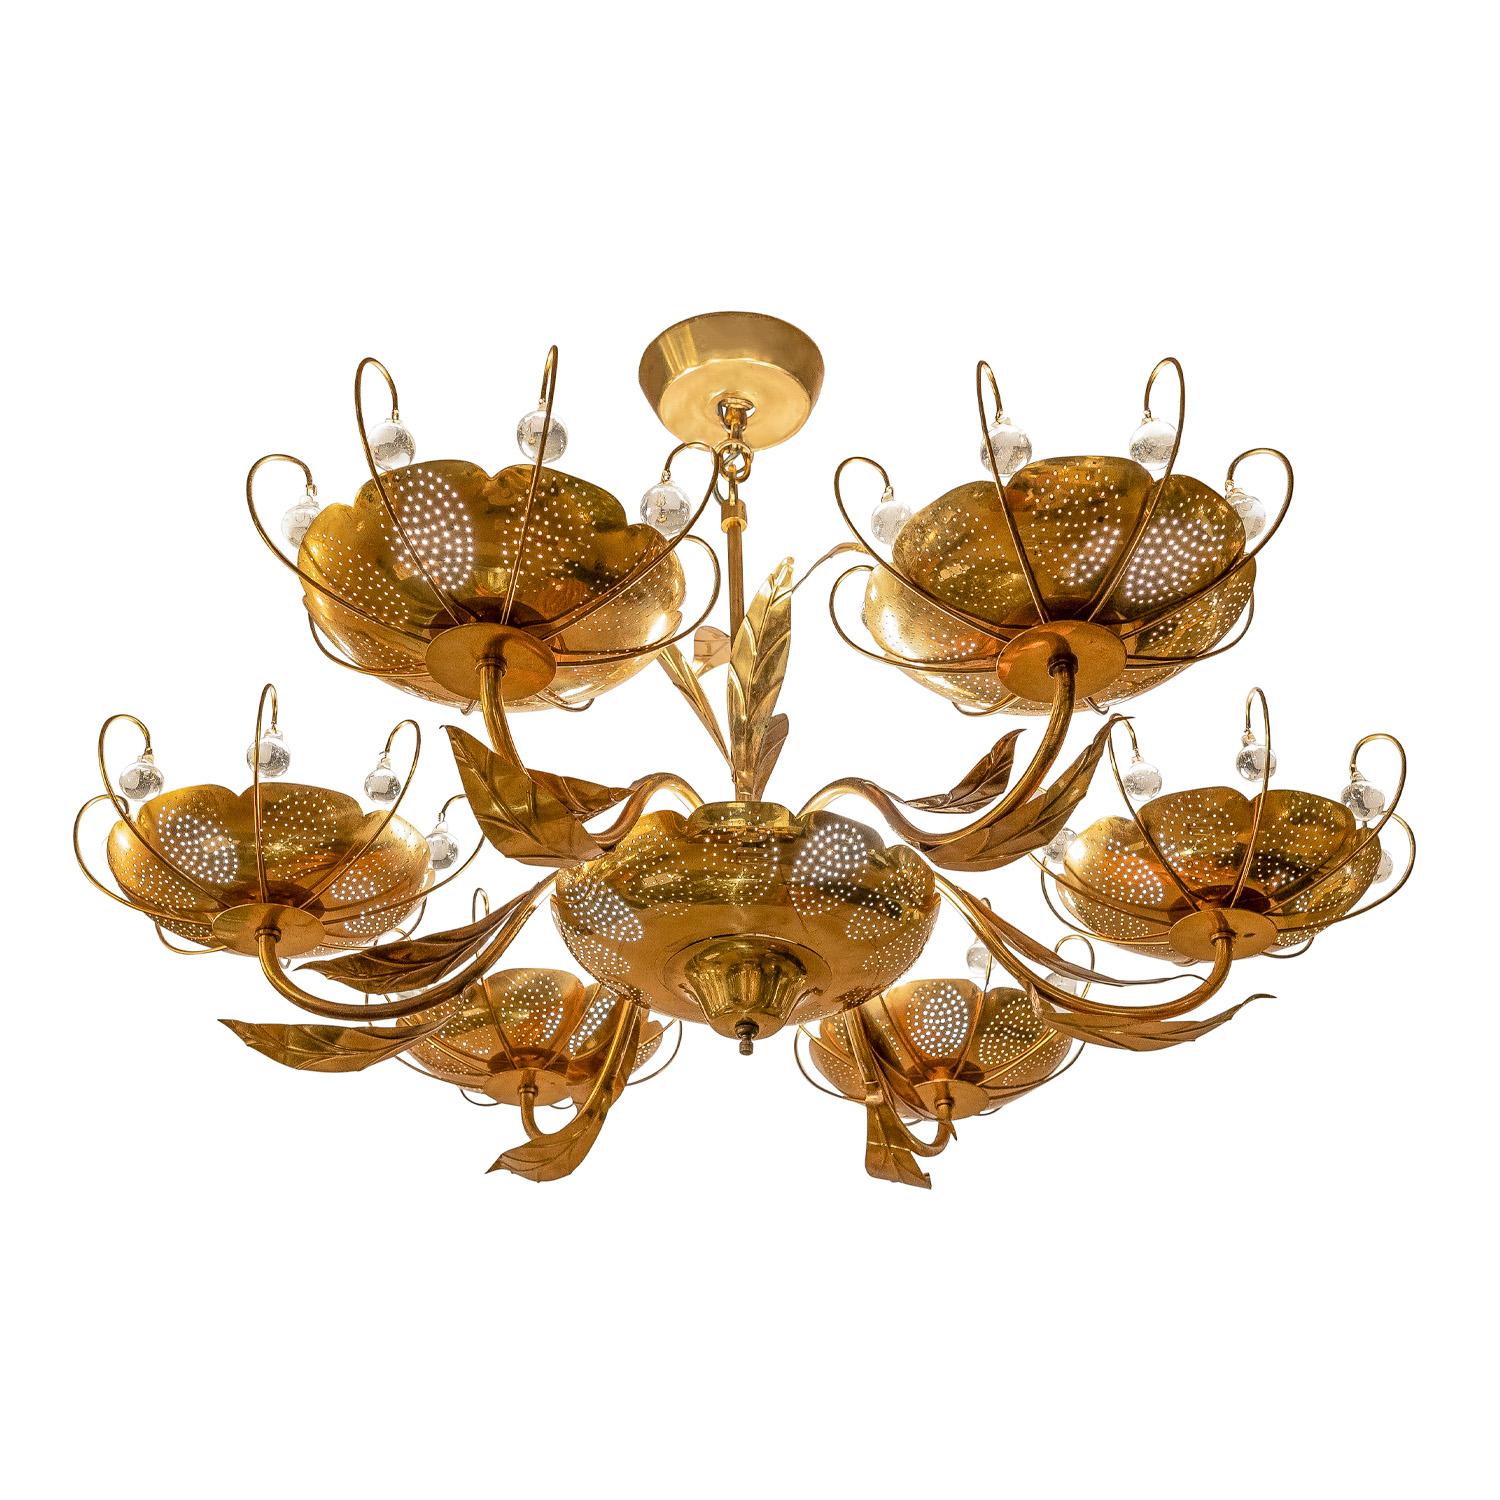 Six arm chandelier in brass with leaves and perforated bobeches, each with suspended crystal orbs, in the style of Paavo Tynell, American 1960's.  The organic motif is beautiful and the crystals add a little glamor.  There is a switch on the bottom